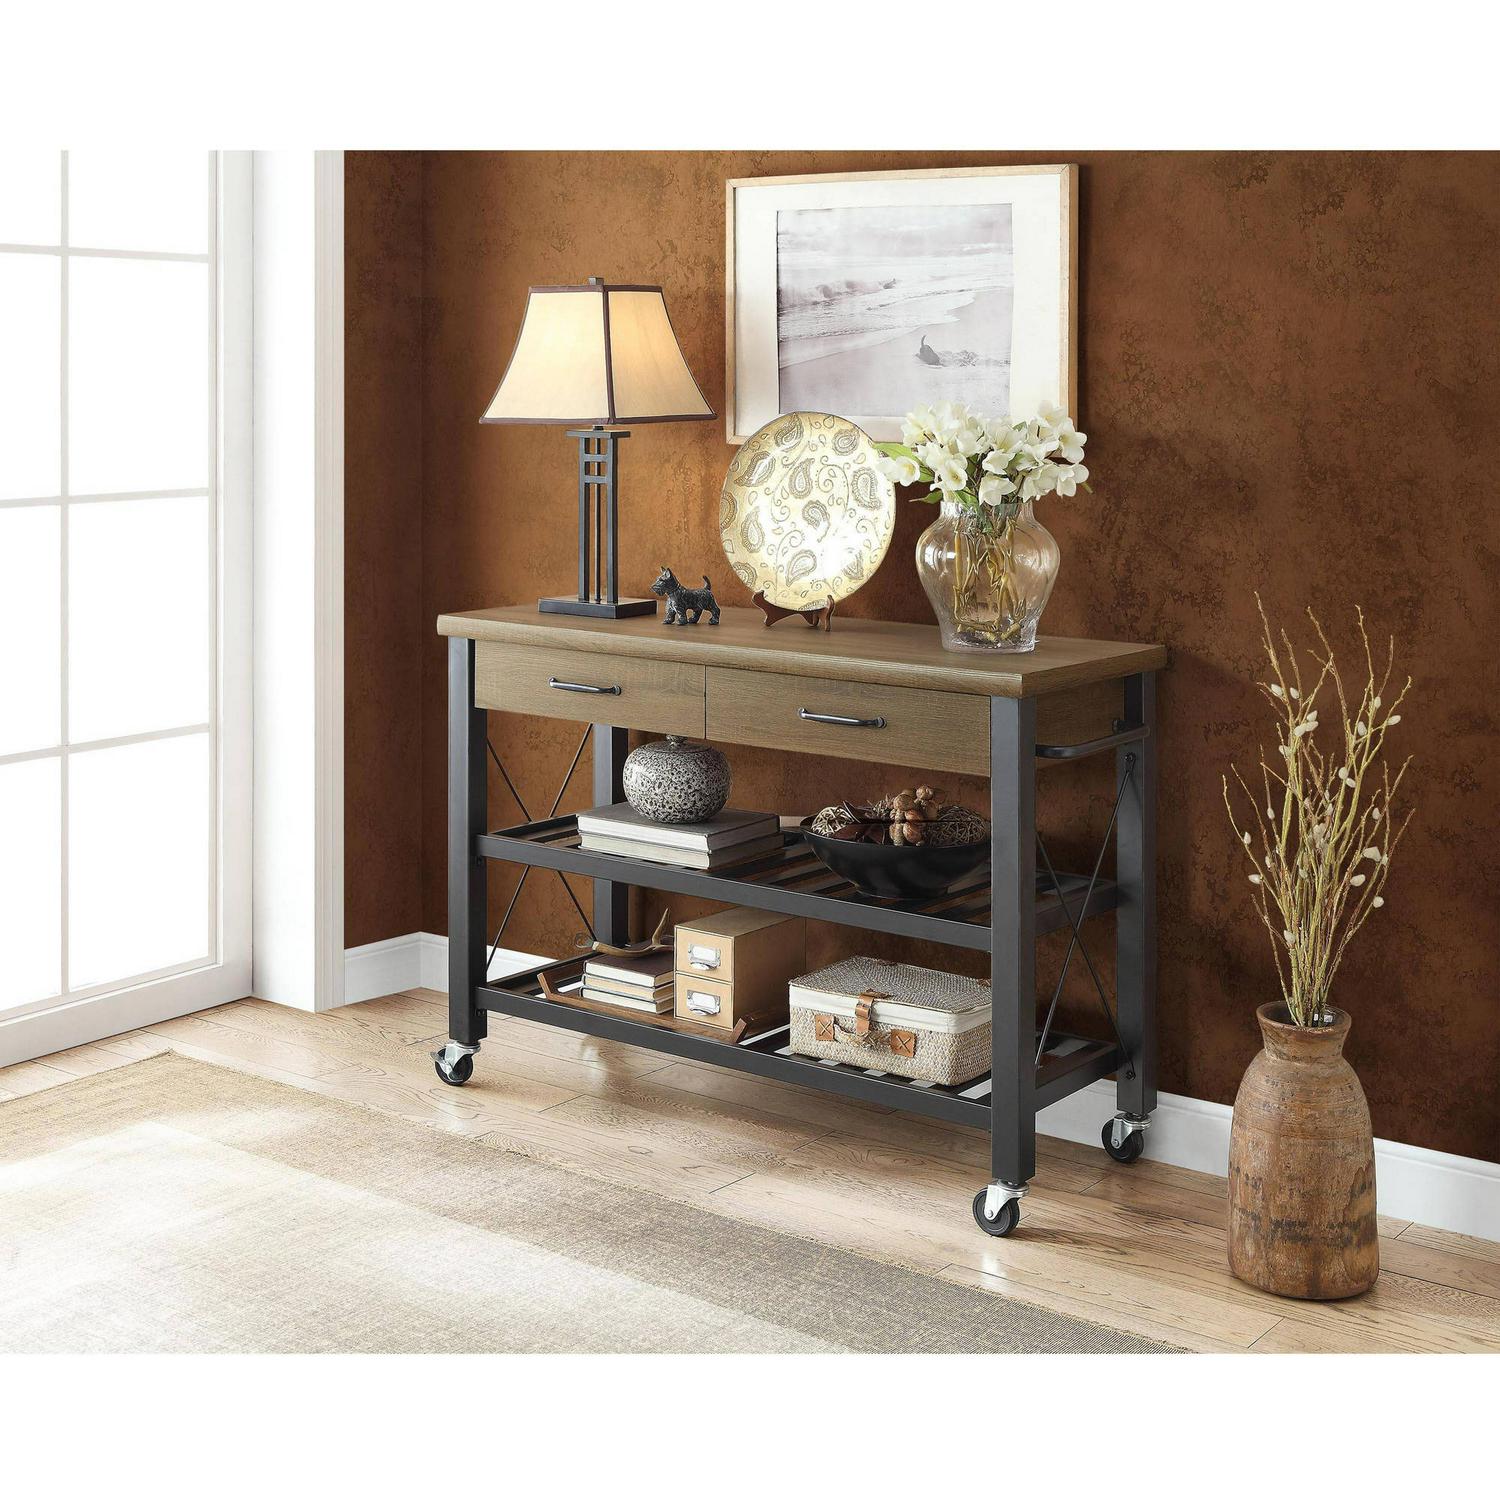 Whalen Santa Fe Kitchen Cart with Metal Shelves and TV Stand Feature